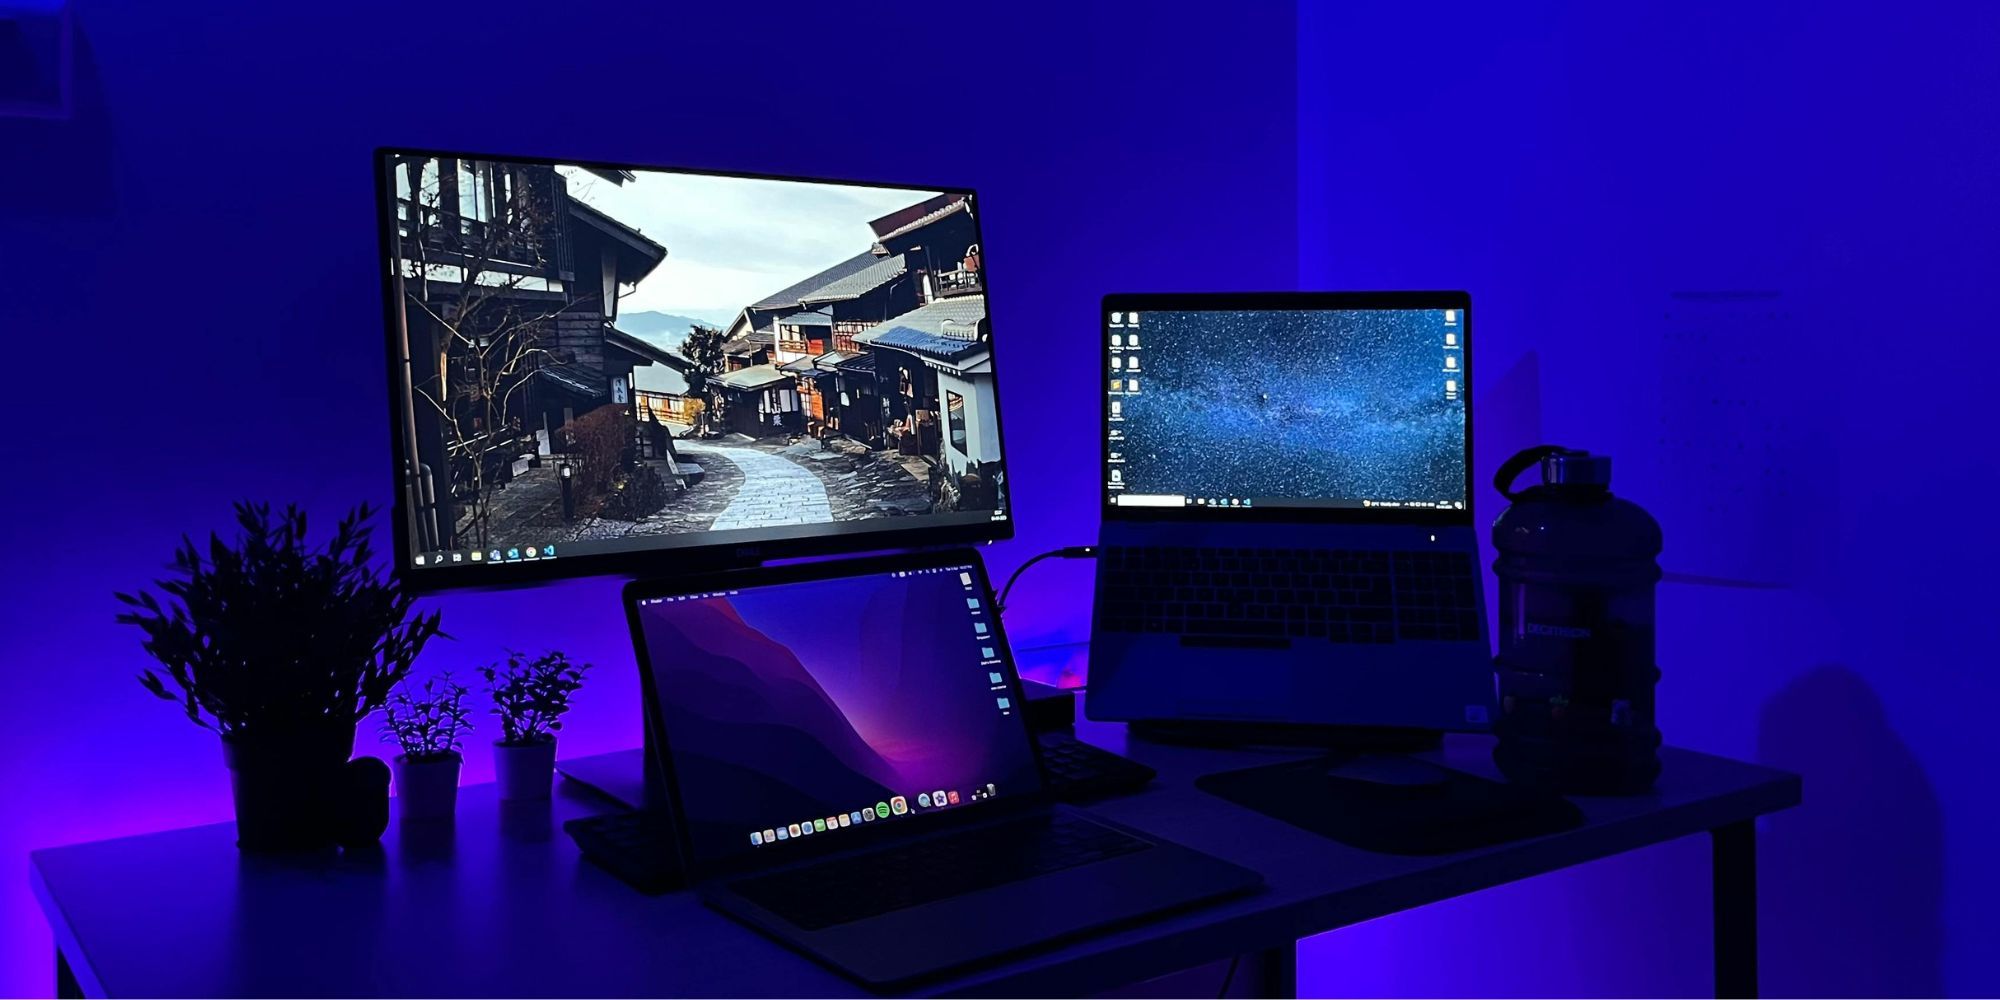 Two Laptops And One Monitor In Dark Room On A Desk With Purple Lighting And Plants